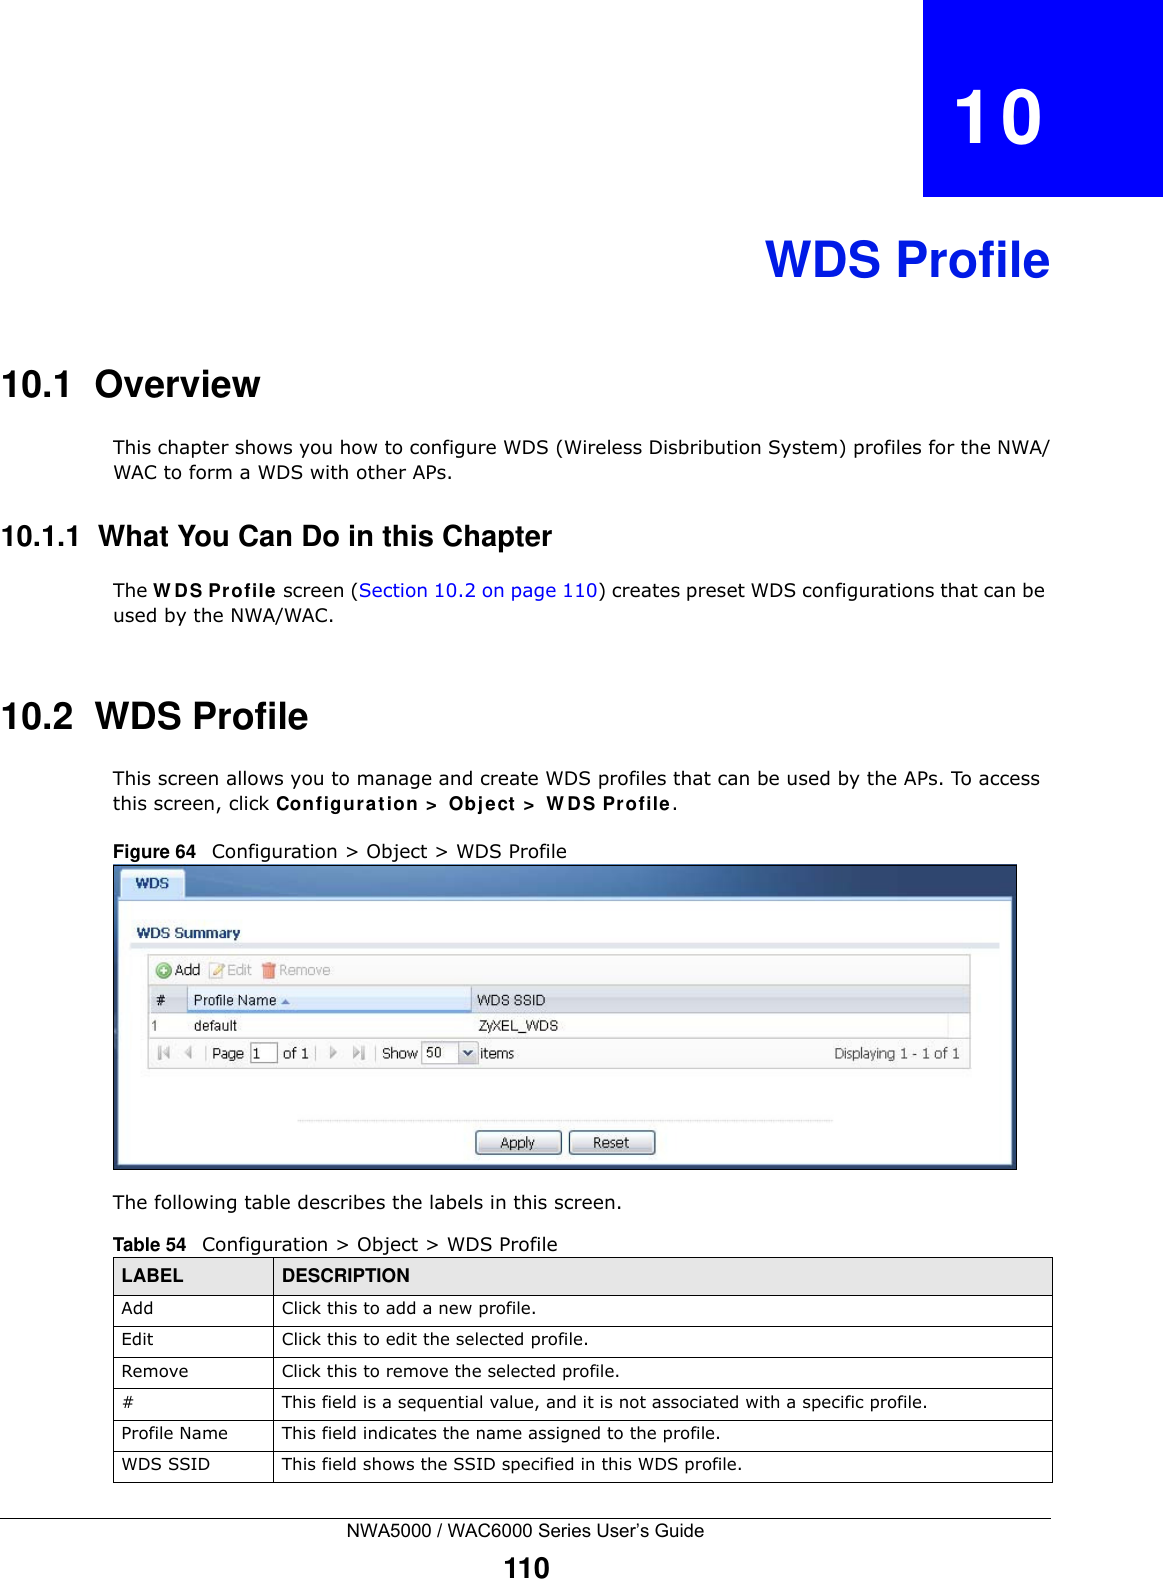 NWA5000 / WAC6000 Series User’s Guide110CHAPTER   10WDS Profile10.1  OverviewThis chapter shows you how to configure WDS (Wireless Disbribution System) profiles for the NWA/WAC to form a WDS with other APs.10.1.1  What You Can Do in this ChapterThe WDS Profile screen (Section 10.2 on page 110) creates preset WDS configurations that can be used by the NWA/WAC.10.2  WDS Profile This screen allows you to manage and create WDS profiles that can be used by the APs. To access this screen, click Configuration &gt; Object &gt; WDS Profile.Figure 64   Configuration &gt; Object &gt; WDS ProfileThe following table describes the labels in this screen.  Table 54   Configuration &gt; Object &gt; WDS ProfileLABEL DESCRIPTIONAdd Click this to add a new profile.Edit Click this to edit the selected profile.Remove Click this to remove the selected profile.# This field is a sequential value, and it is not associated with a specific profile.Profile Name This field indicates the name assigned to the profile.WDS SSID This field shows the SSID specified in this WDS profile.